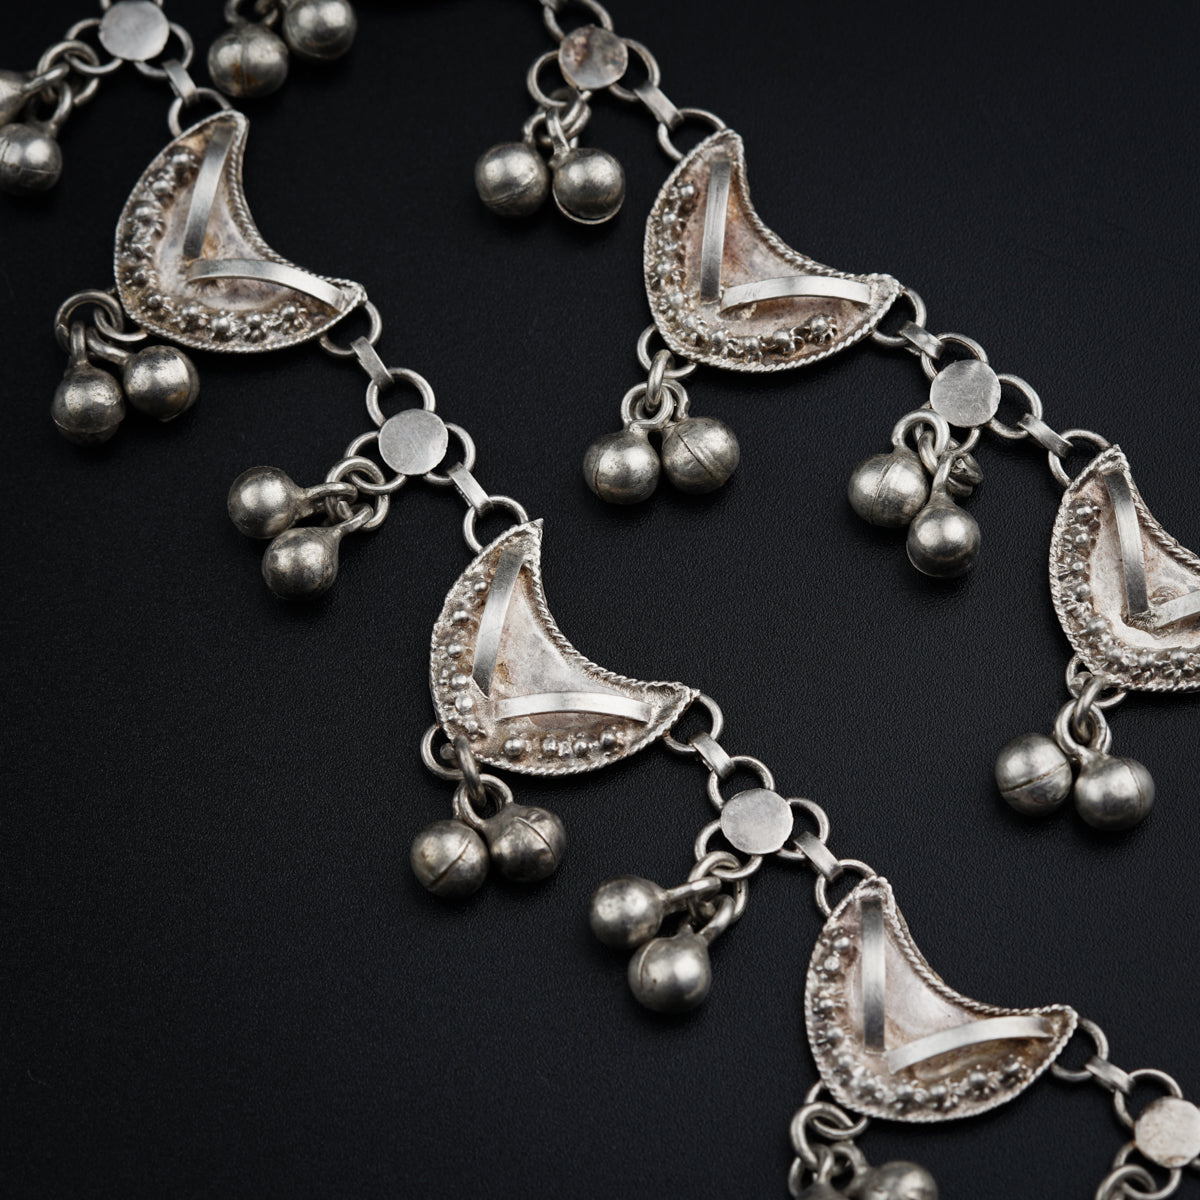 a close up of a silver necklace on a black surface